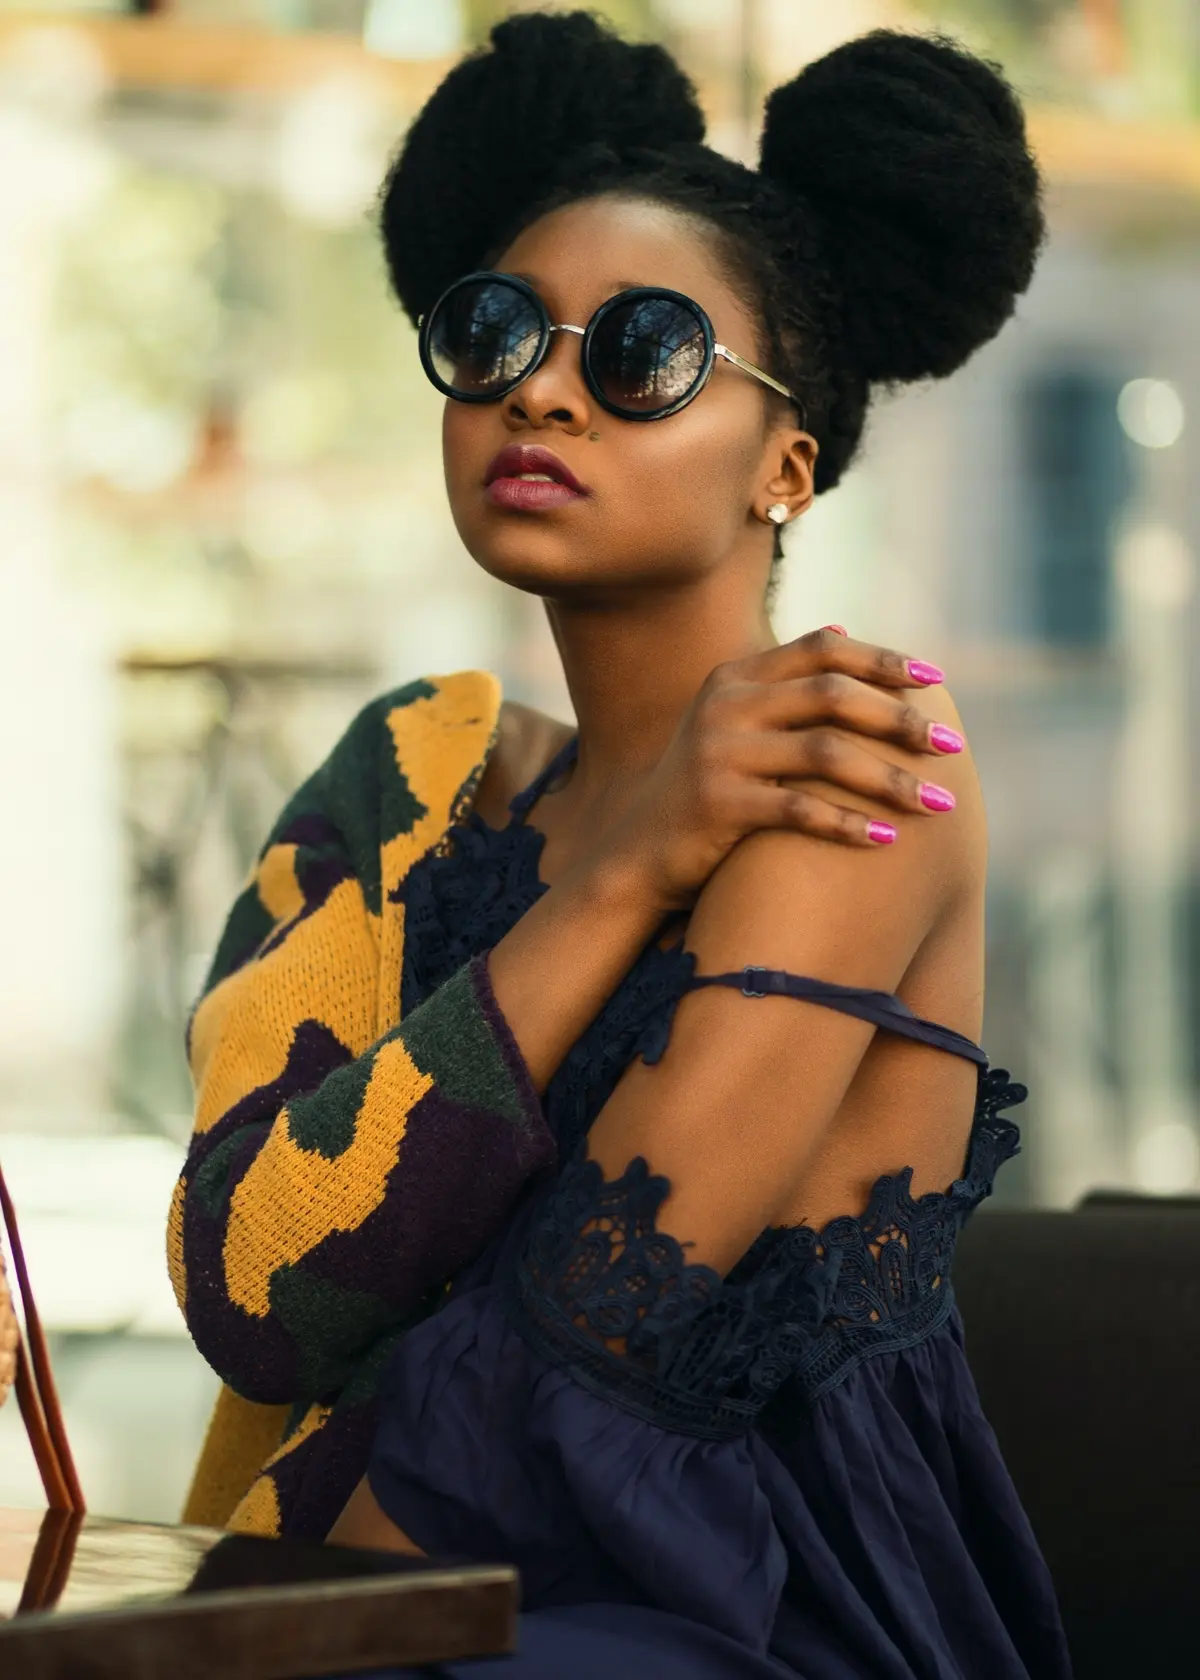 black woman with round sunglasses and space buns